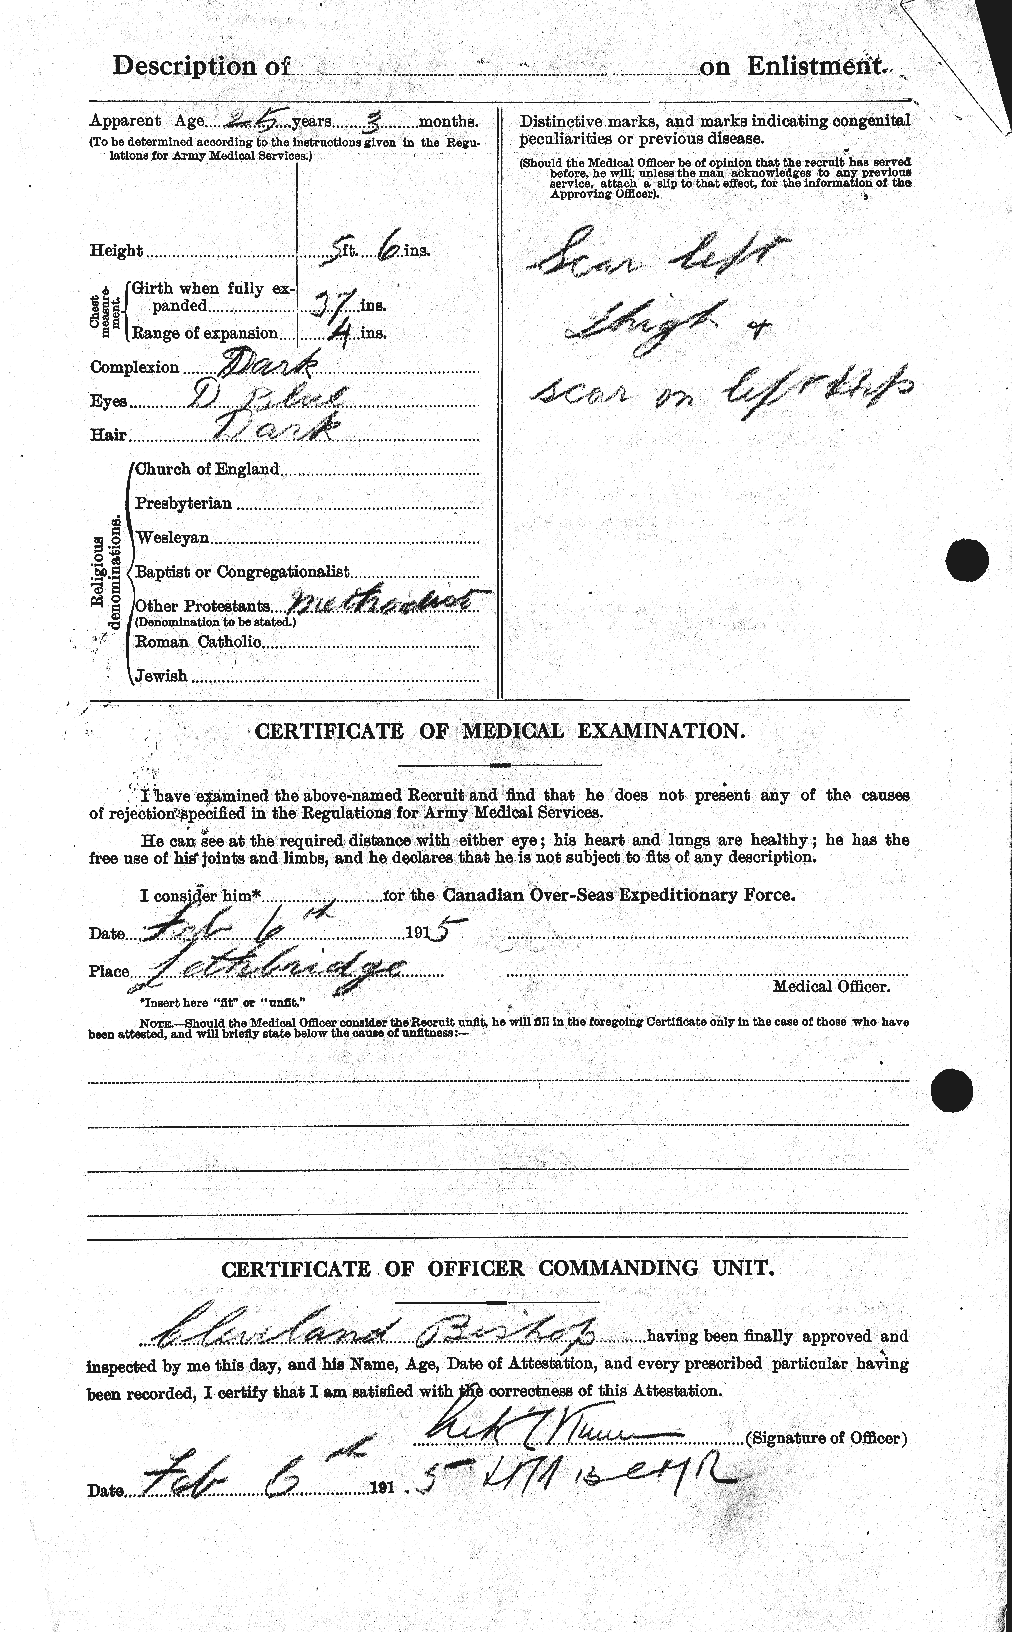 Personnel Records of the First World War - CEF 244205b